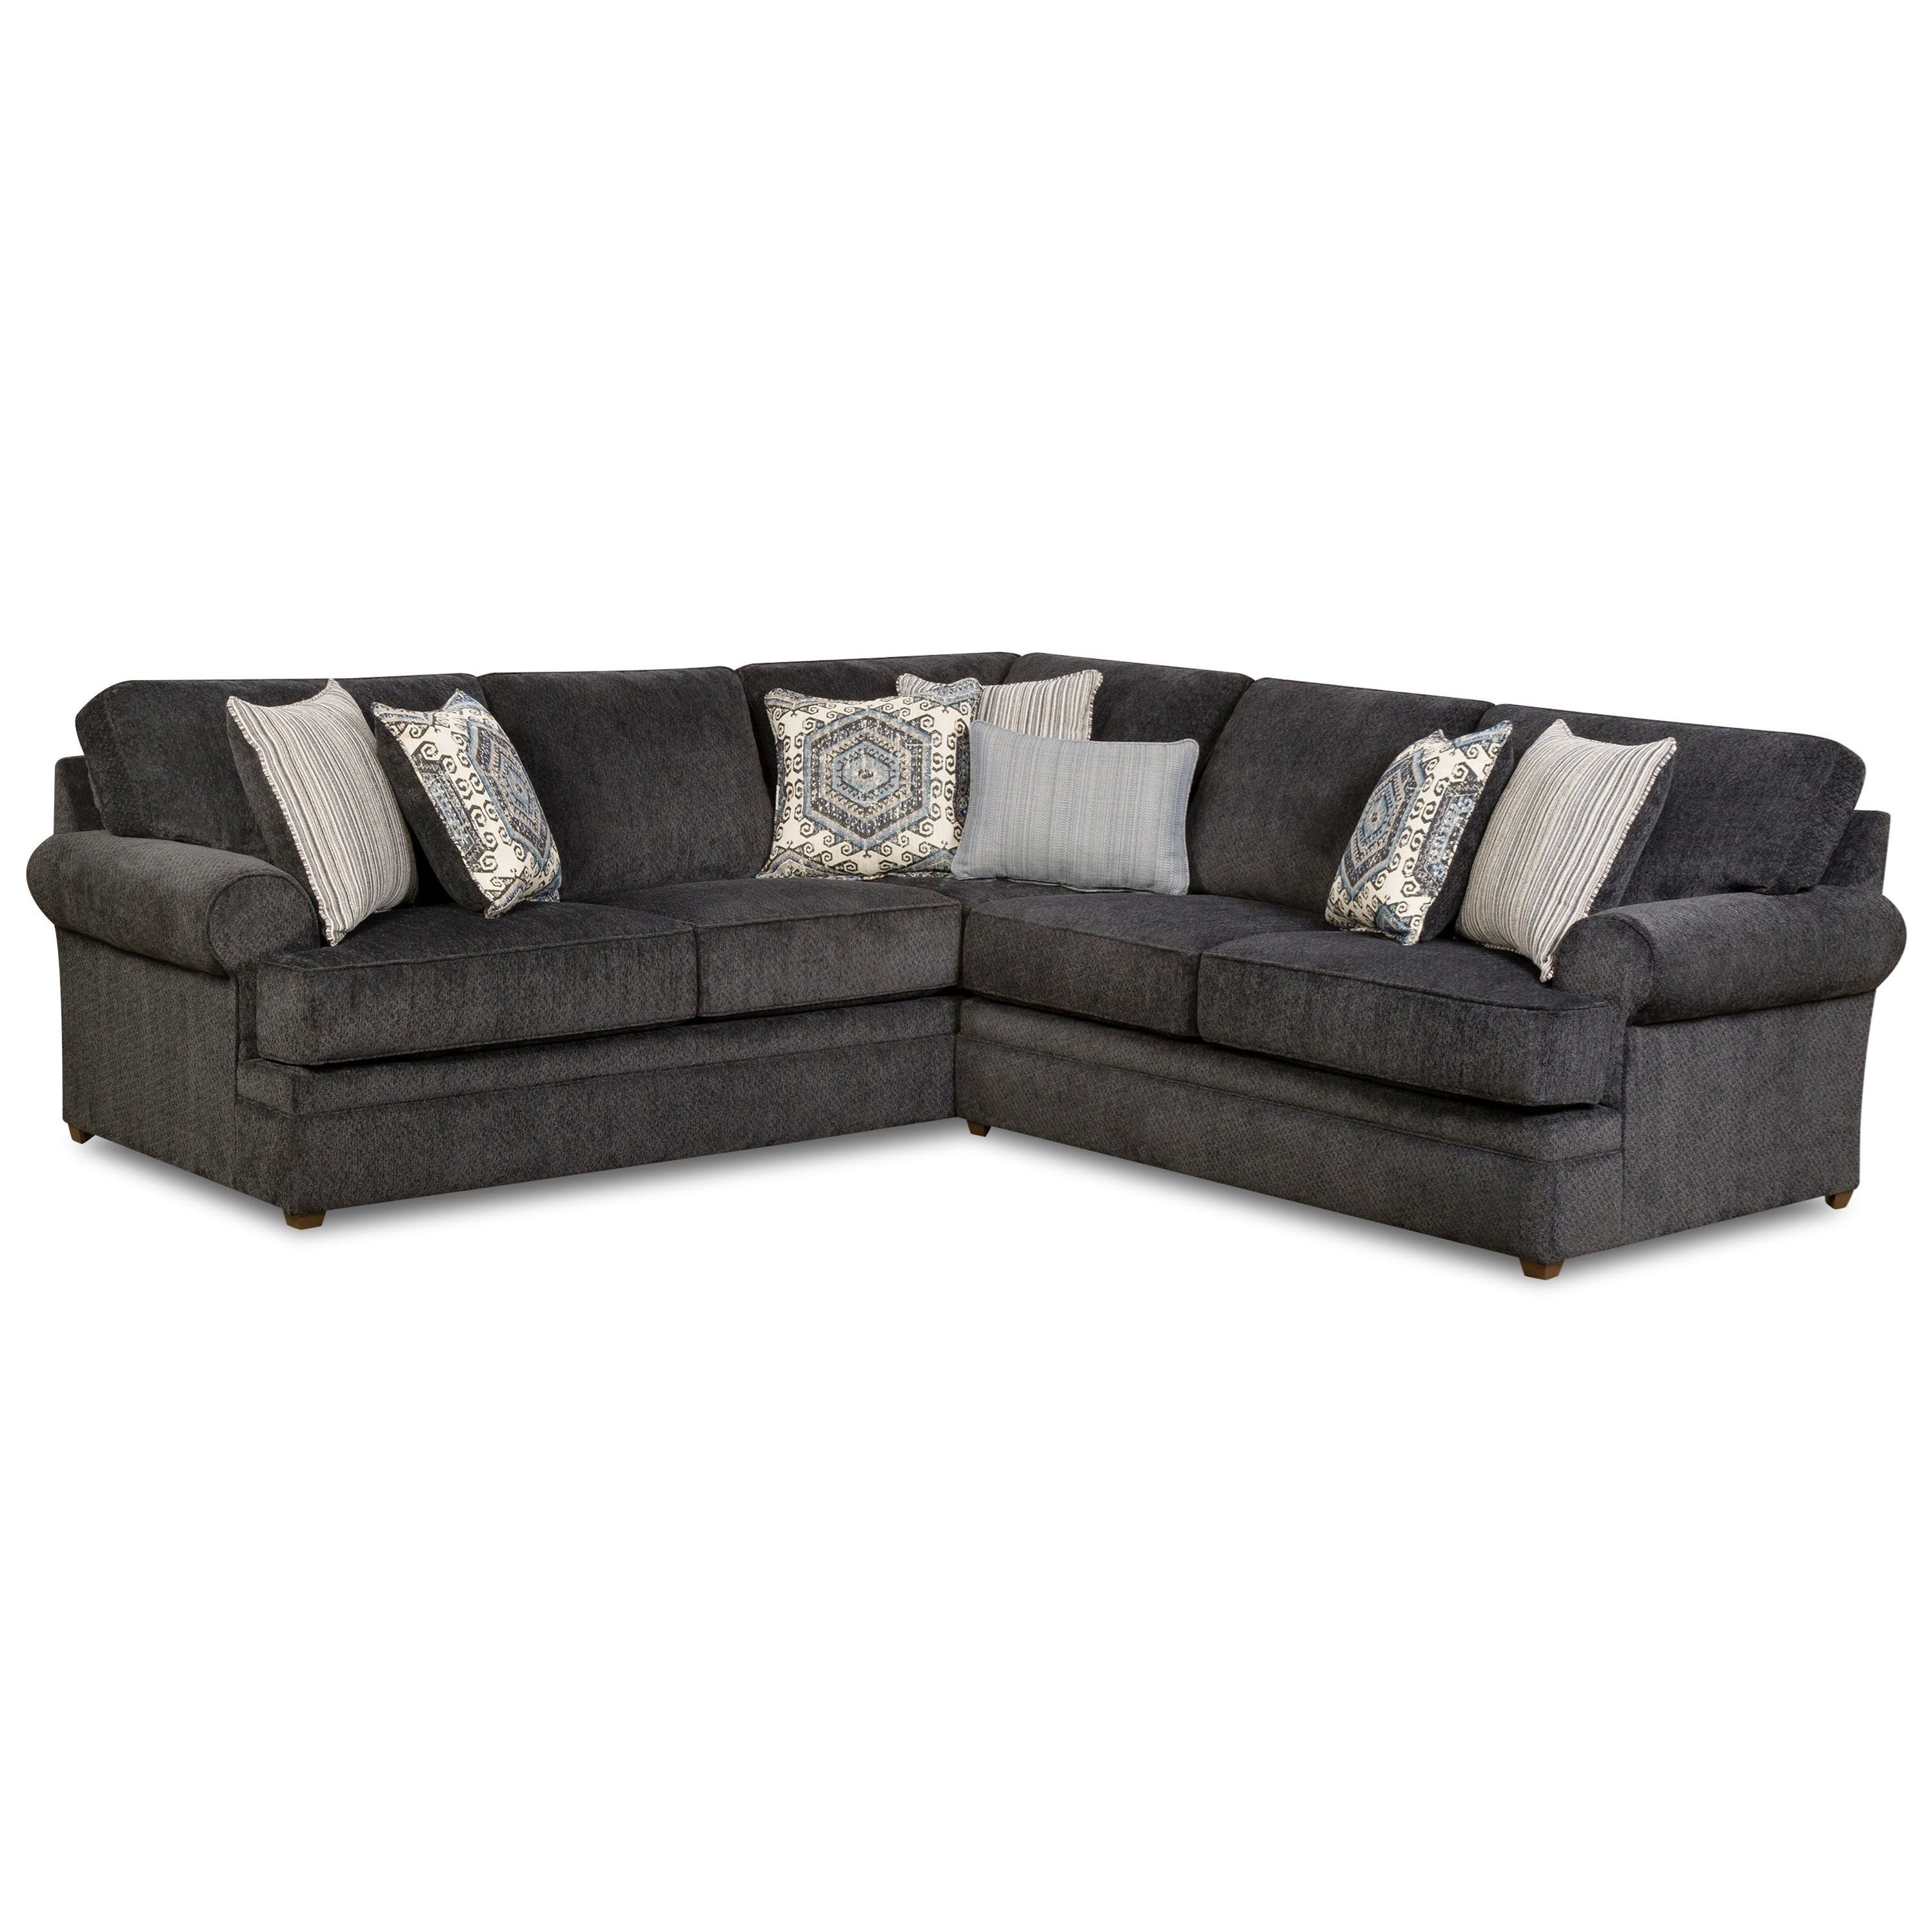 Simmons Upholstery 8530 Br Transitional Sectional Sofa With Rolled Inside Sectional Sofas At Birmingham Al (View 4 of 10)